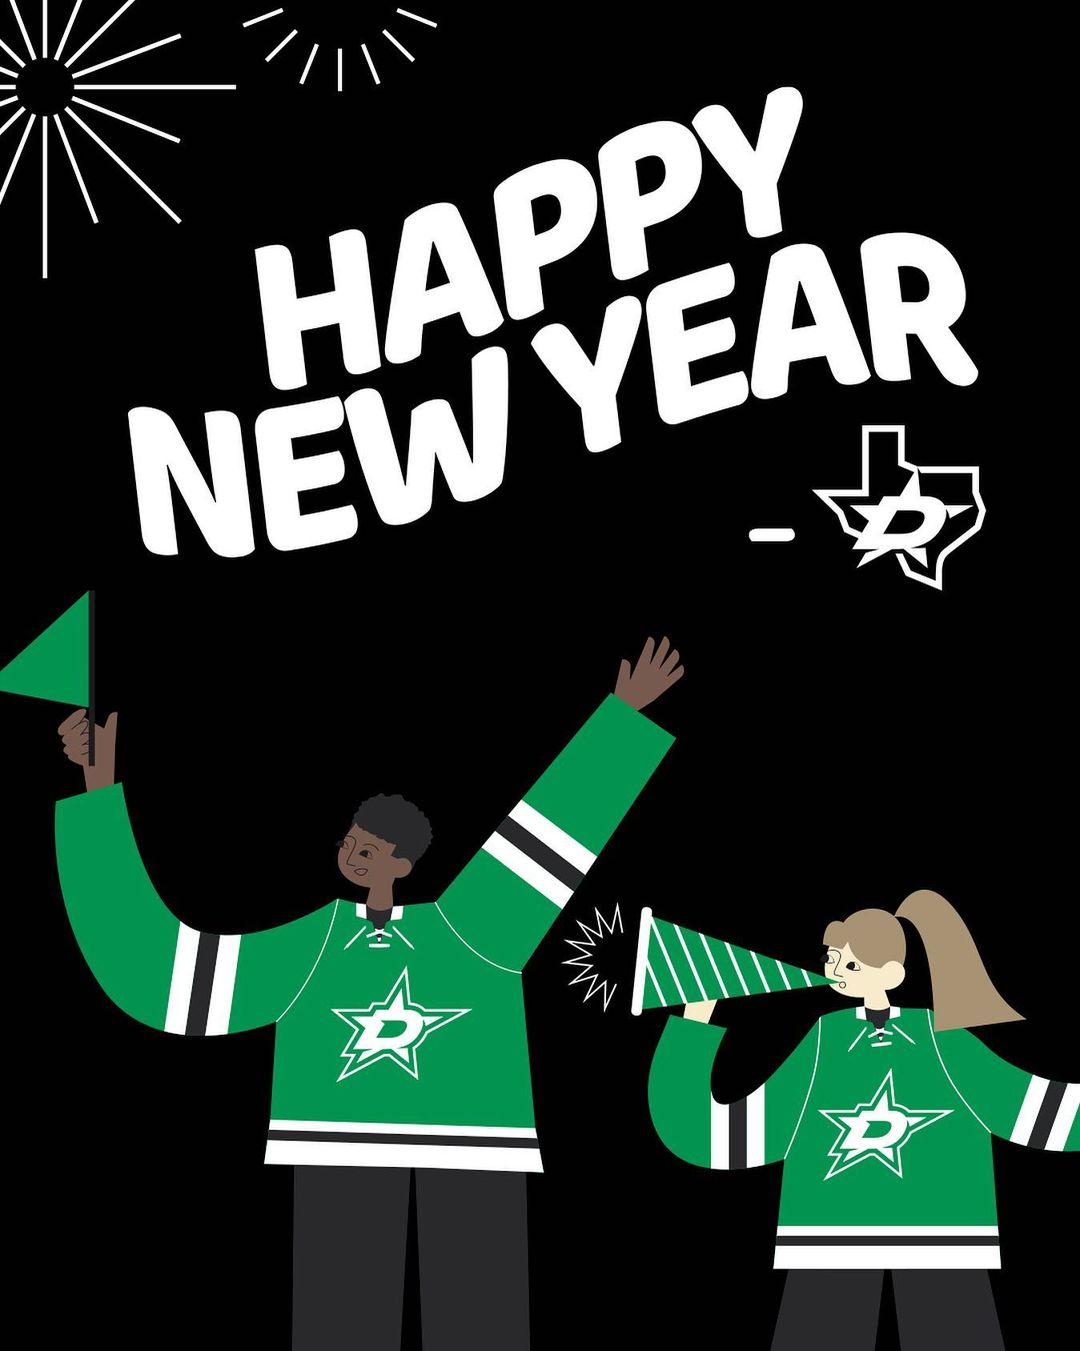 To our #TexasHockey family and beyond, Happy New Year!...